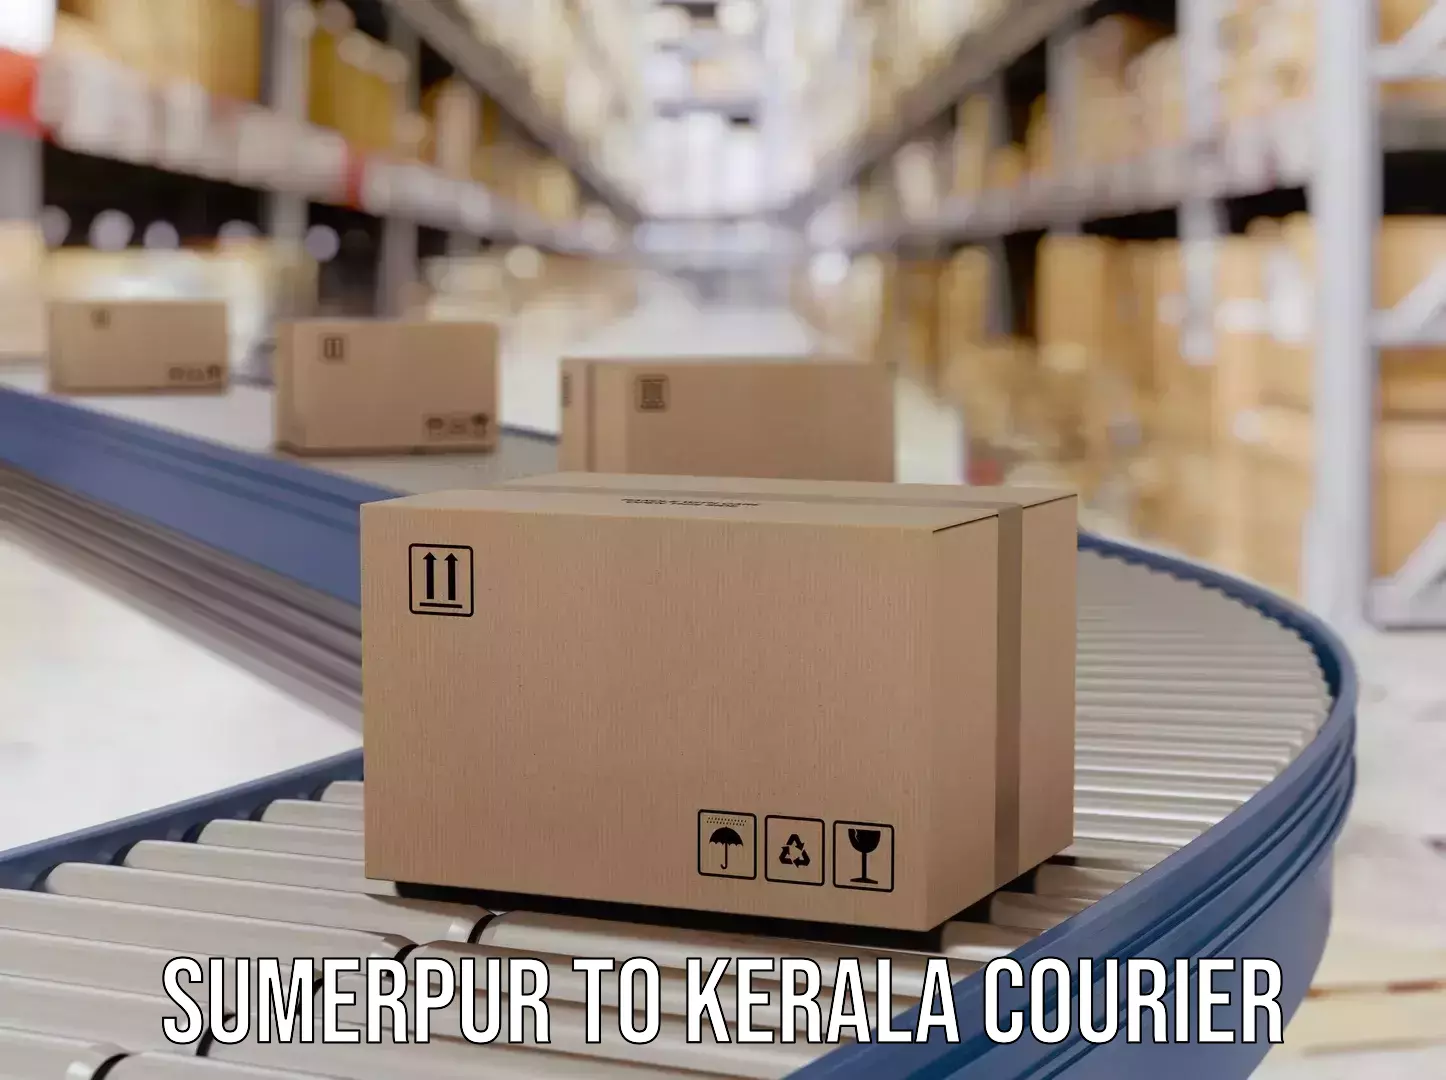 Multi-national courier services Sumerpur to Perinthalmanna